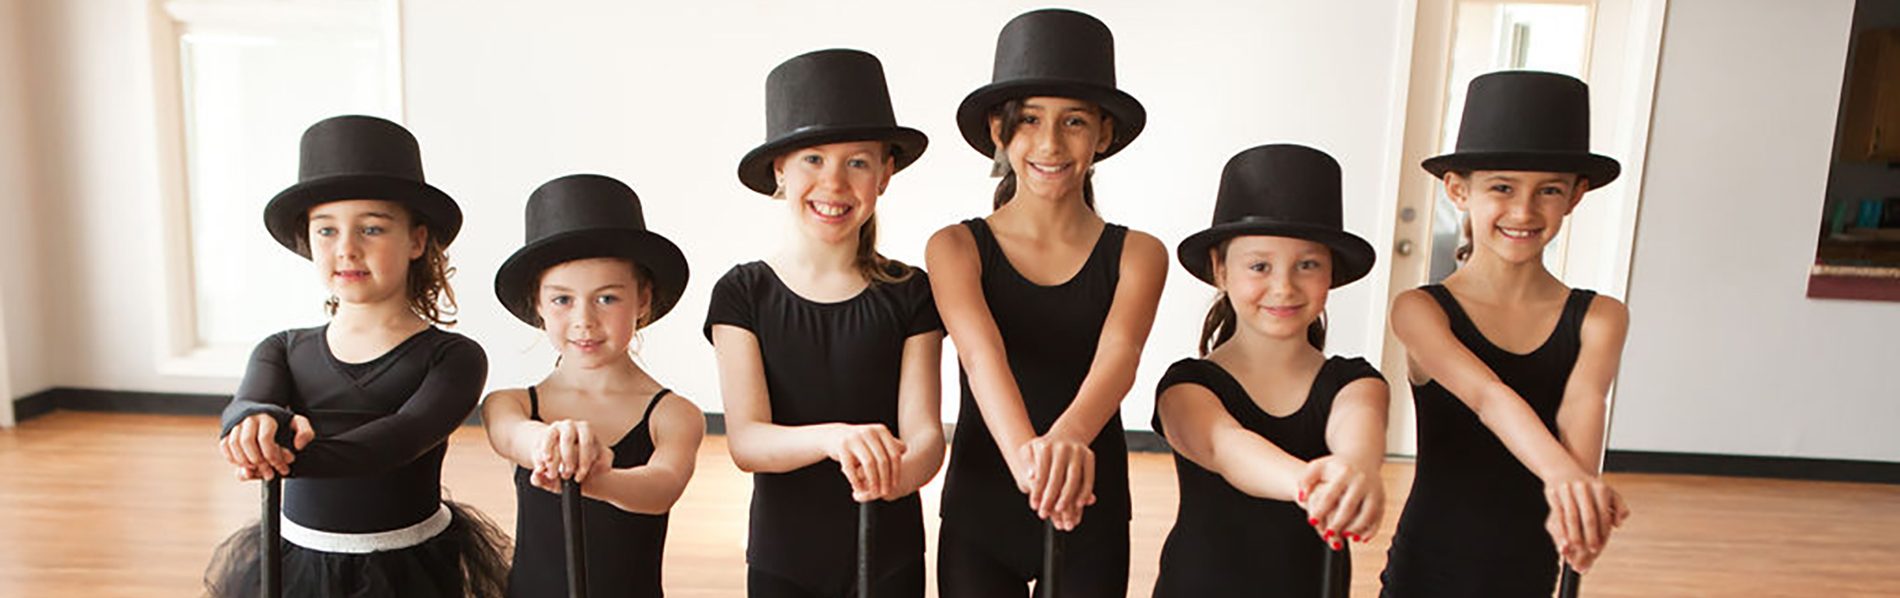 Calgary Musical Theatre classes for kids